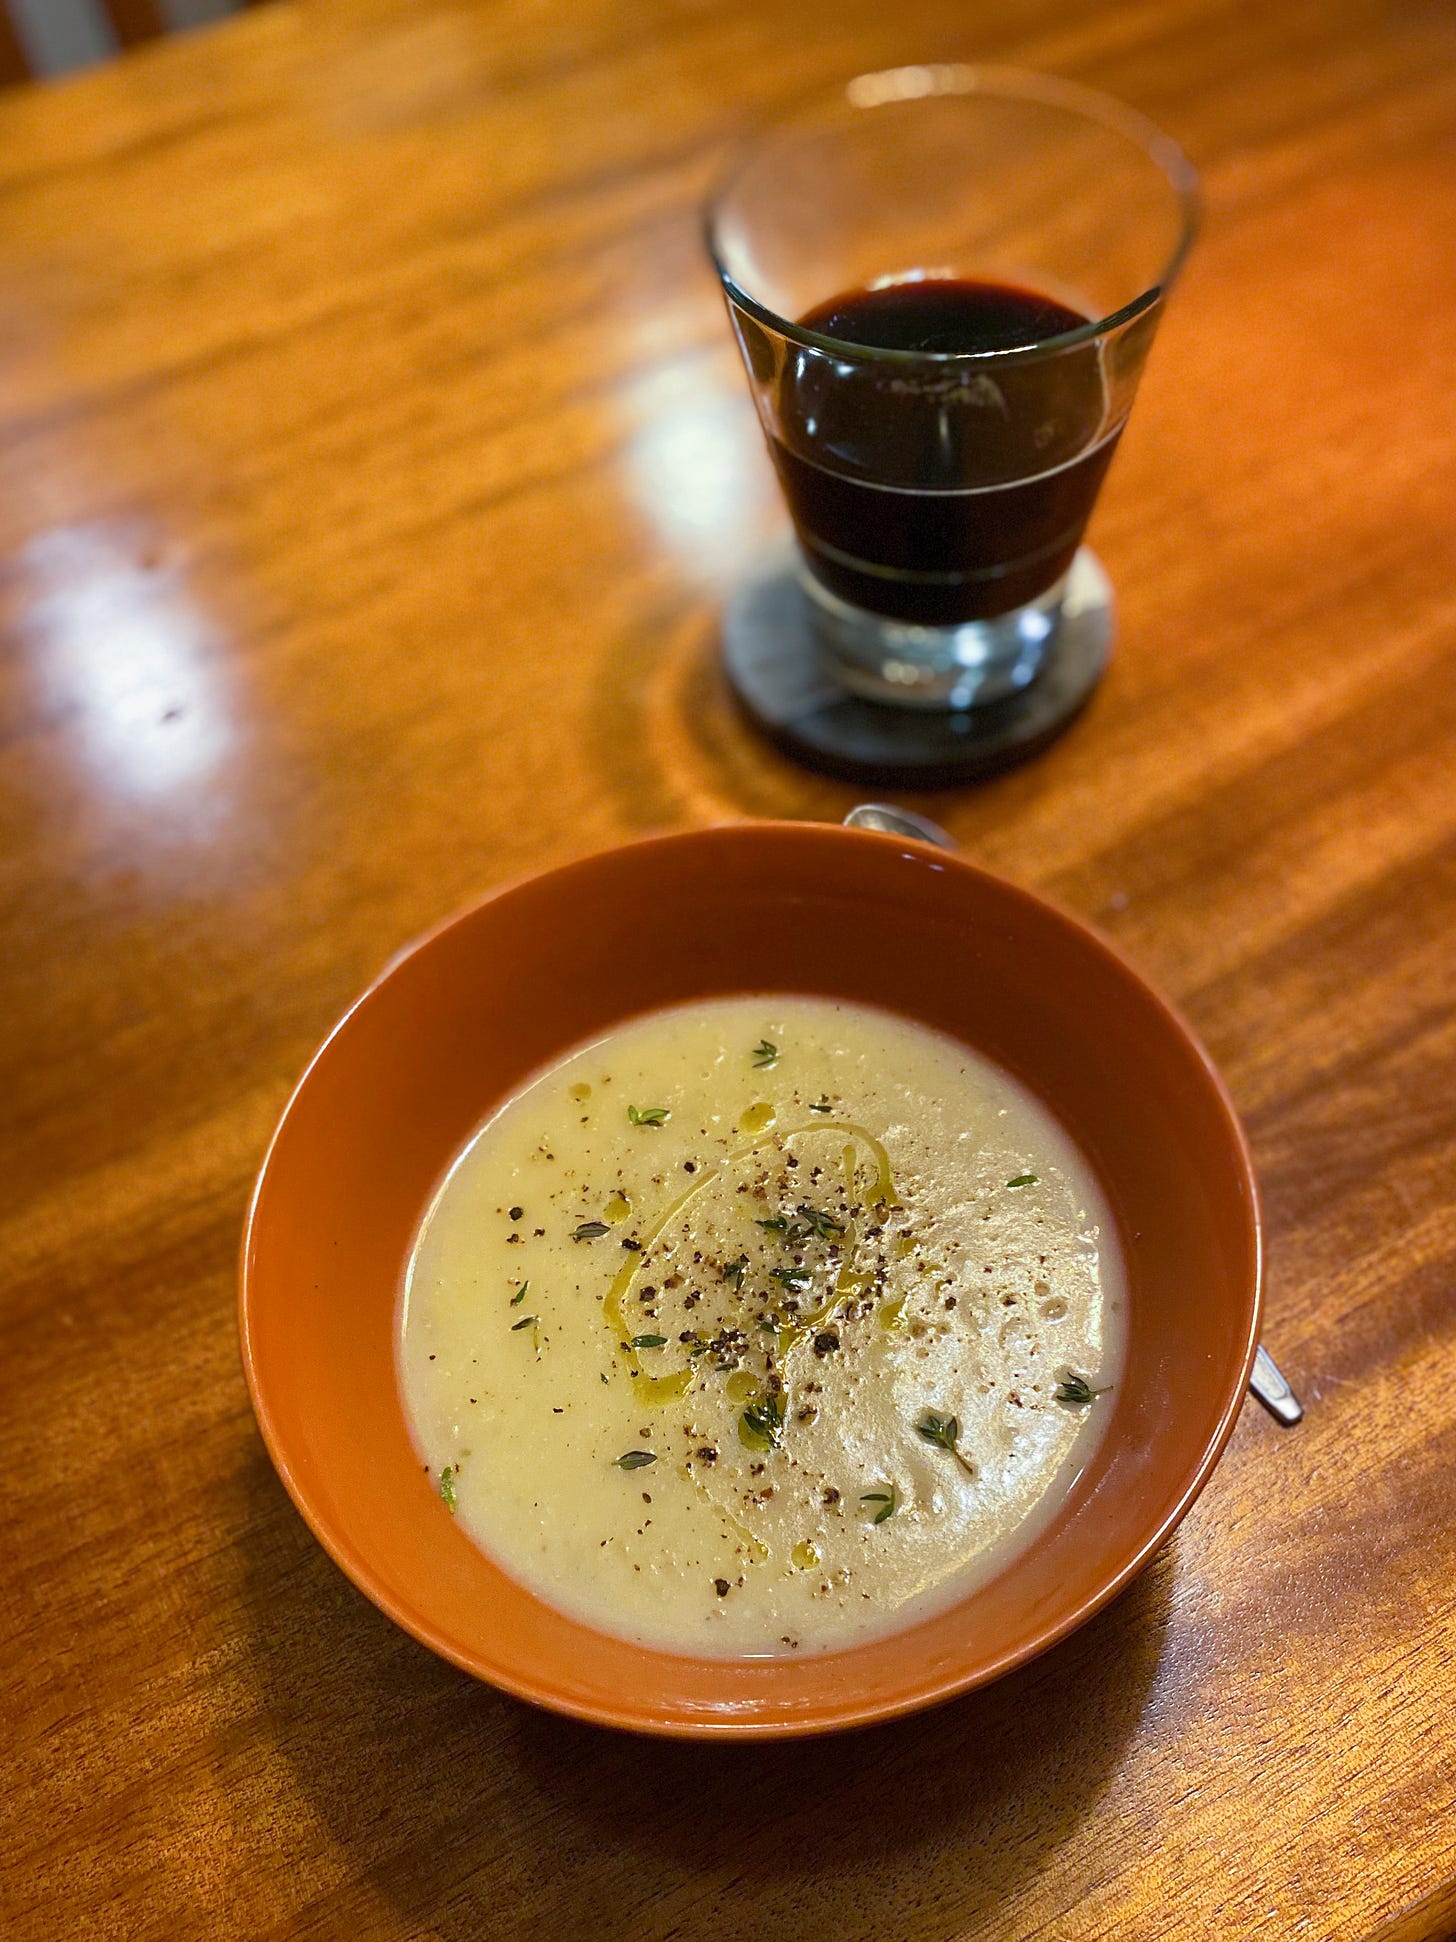 An orange bowl of potato soup, drizzled with oil and flecked on top with cracked pepper and fresh thyme leaves. On a coaster behind the bowl is a glass of stout.